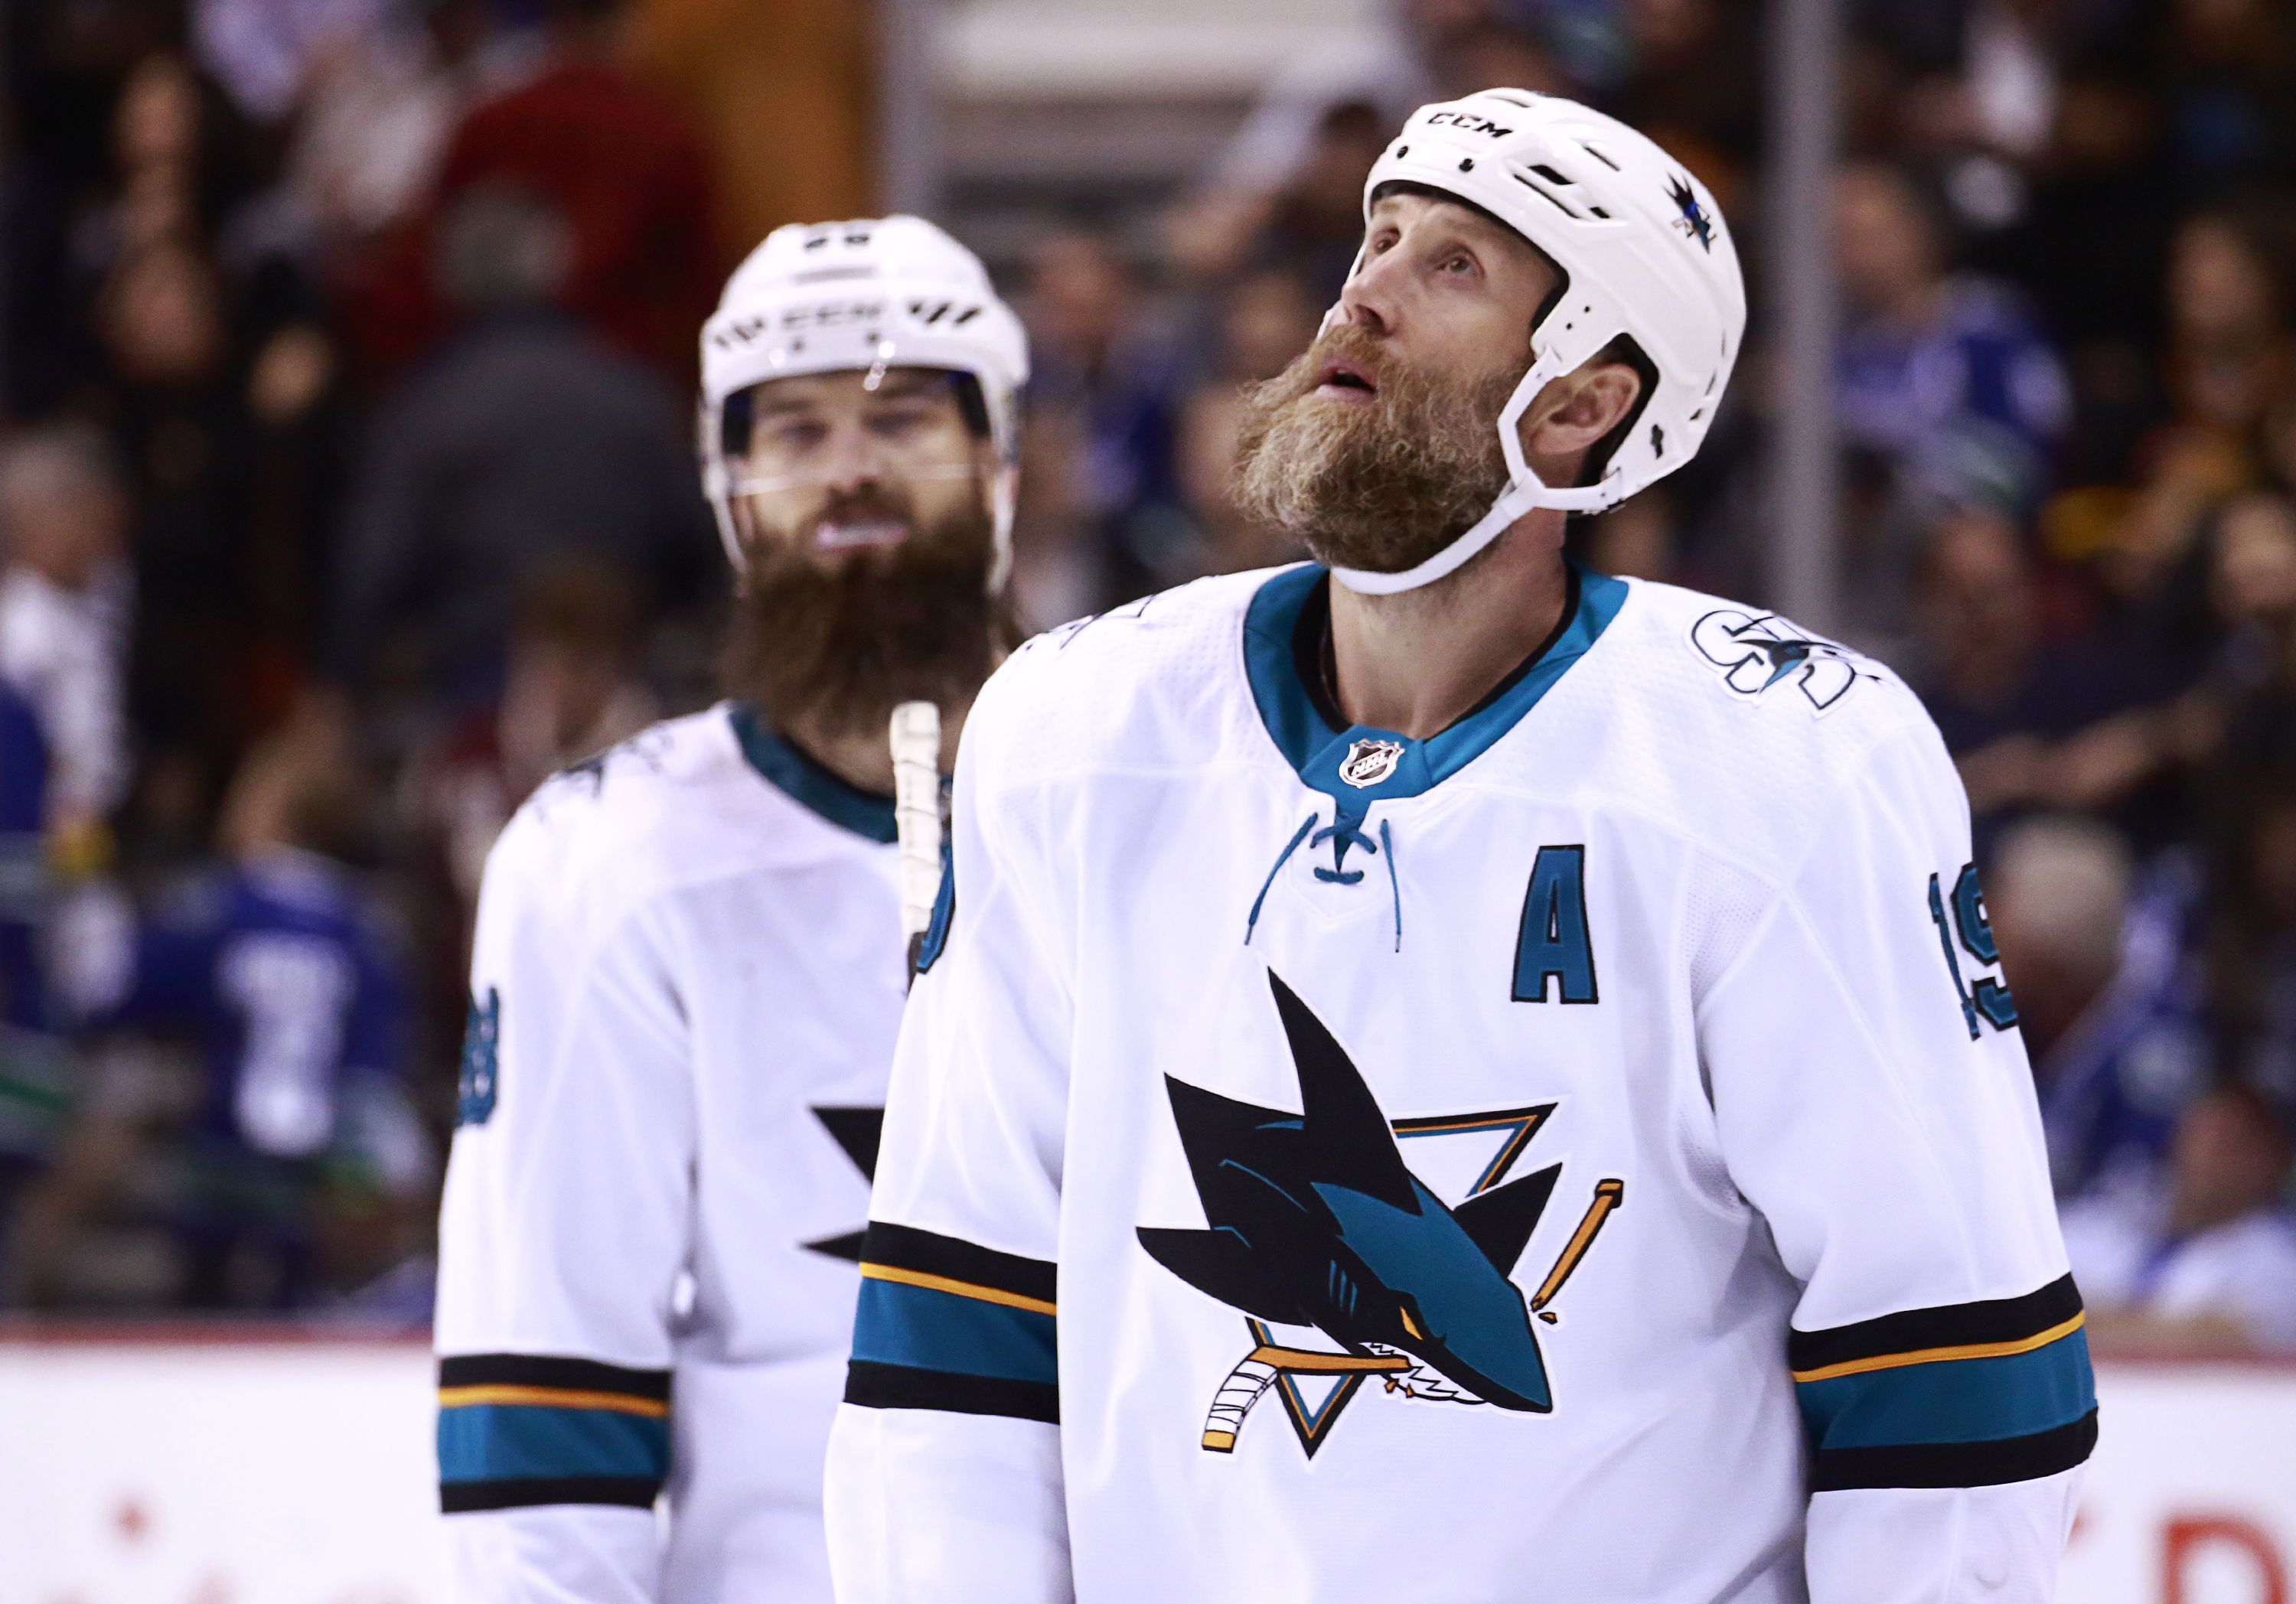 VANCOUVER, BC - APRIL 2: Joe Thornton #19 of the San Jose Sharks looks on dejected after their NHL game against the Vancouver Canucks at Rogers Arena April 2, 2019 in Vancouver, British Columbia, Canada. Vancouver won 4-2.